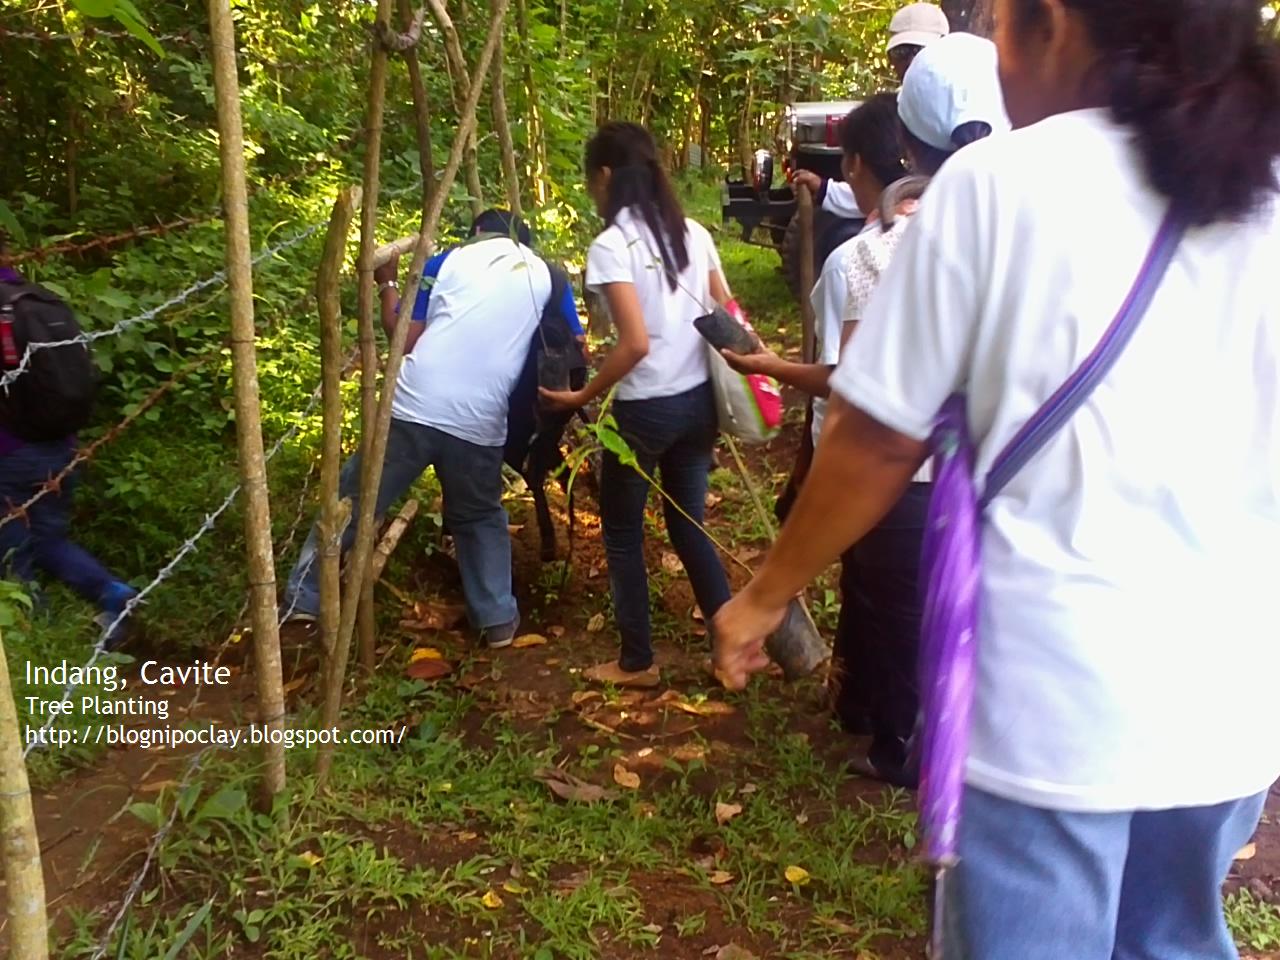 Buhay Poclay, Time for Sharing ;): More Than Just a Tree Planting